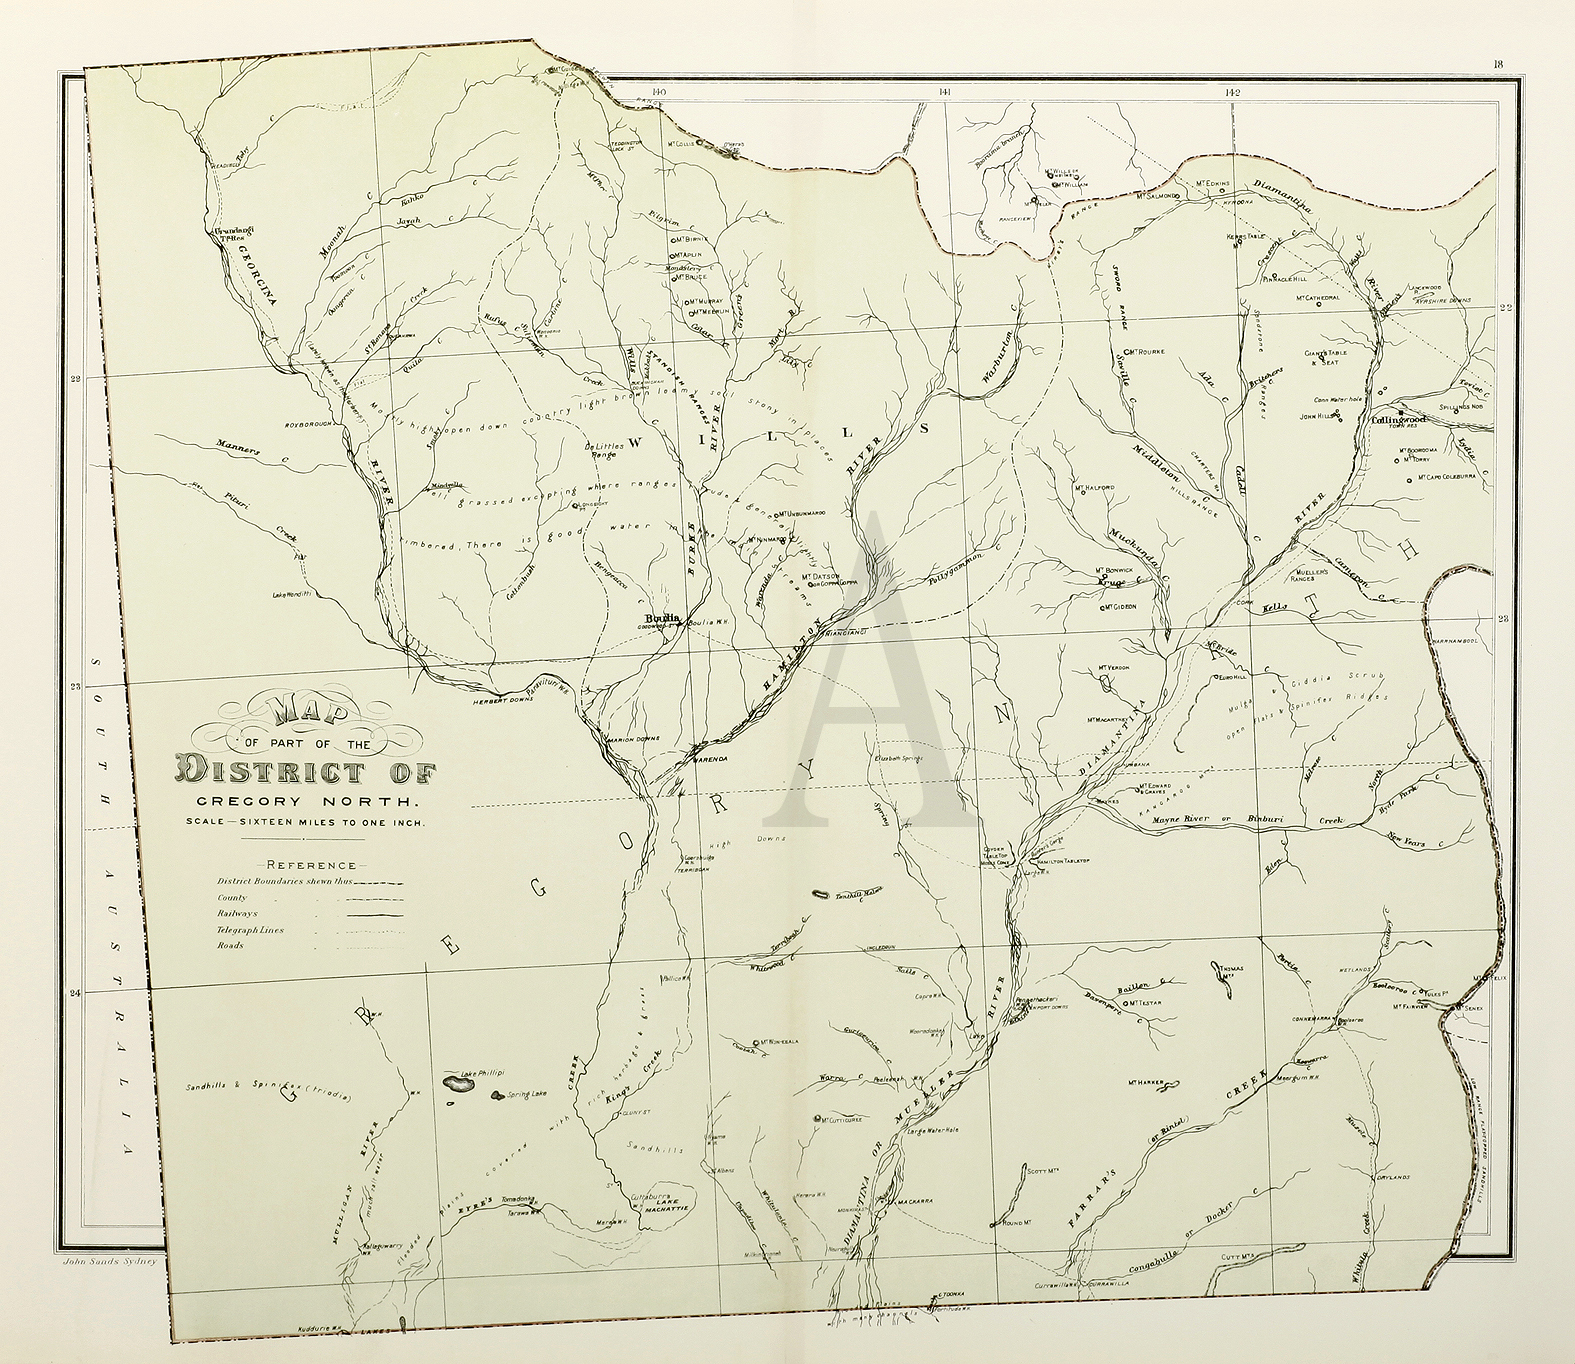 Map of part of the District of Gregory North. - Antique Map from 1886